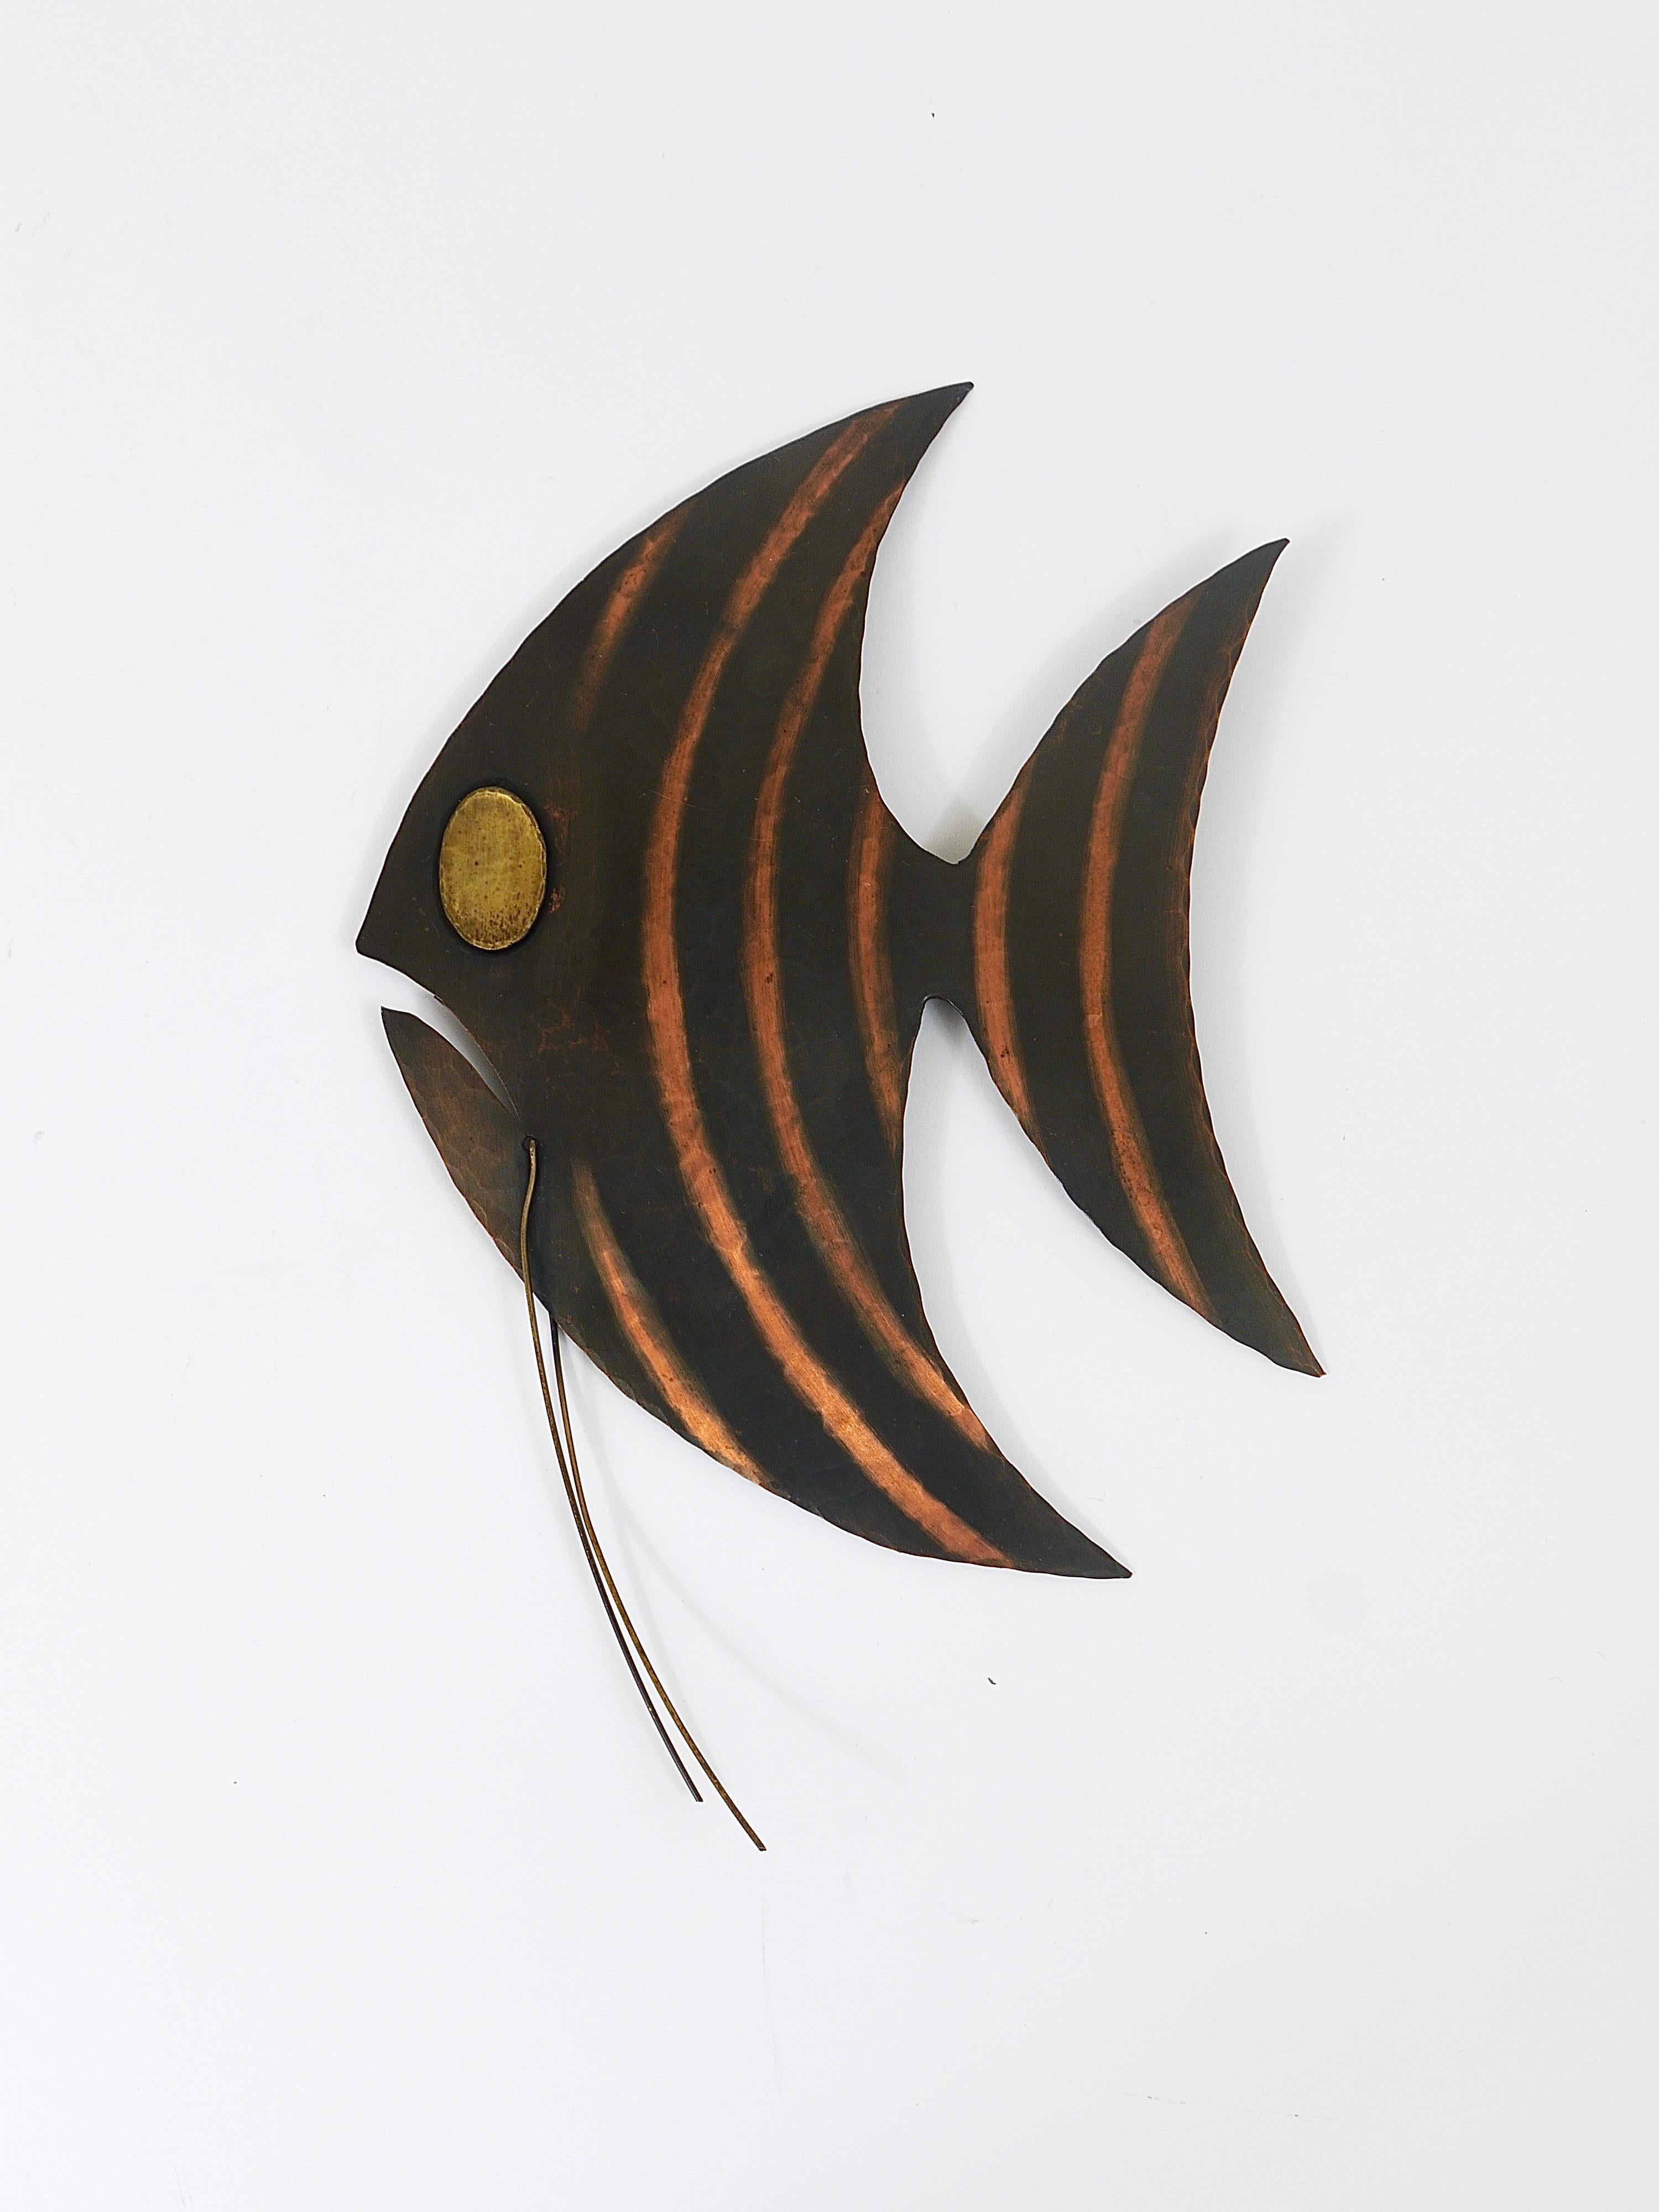 20th Century Midcentury Hammered Angel Fish Wall Plaque Sculpture, Copper, Austria, 1950s For Sale